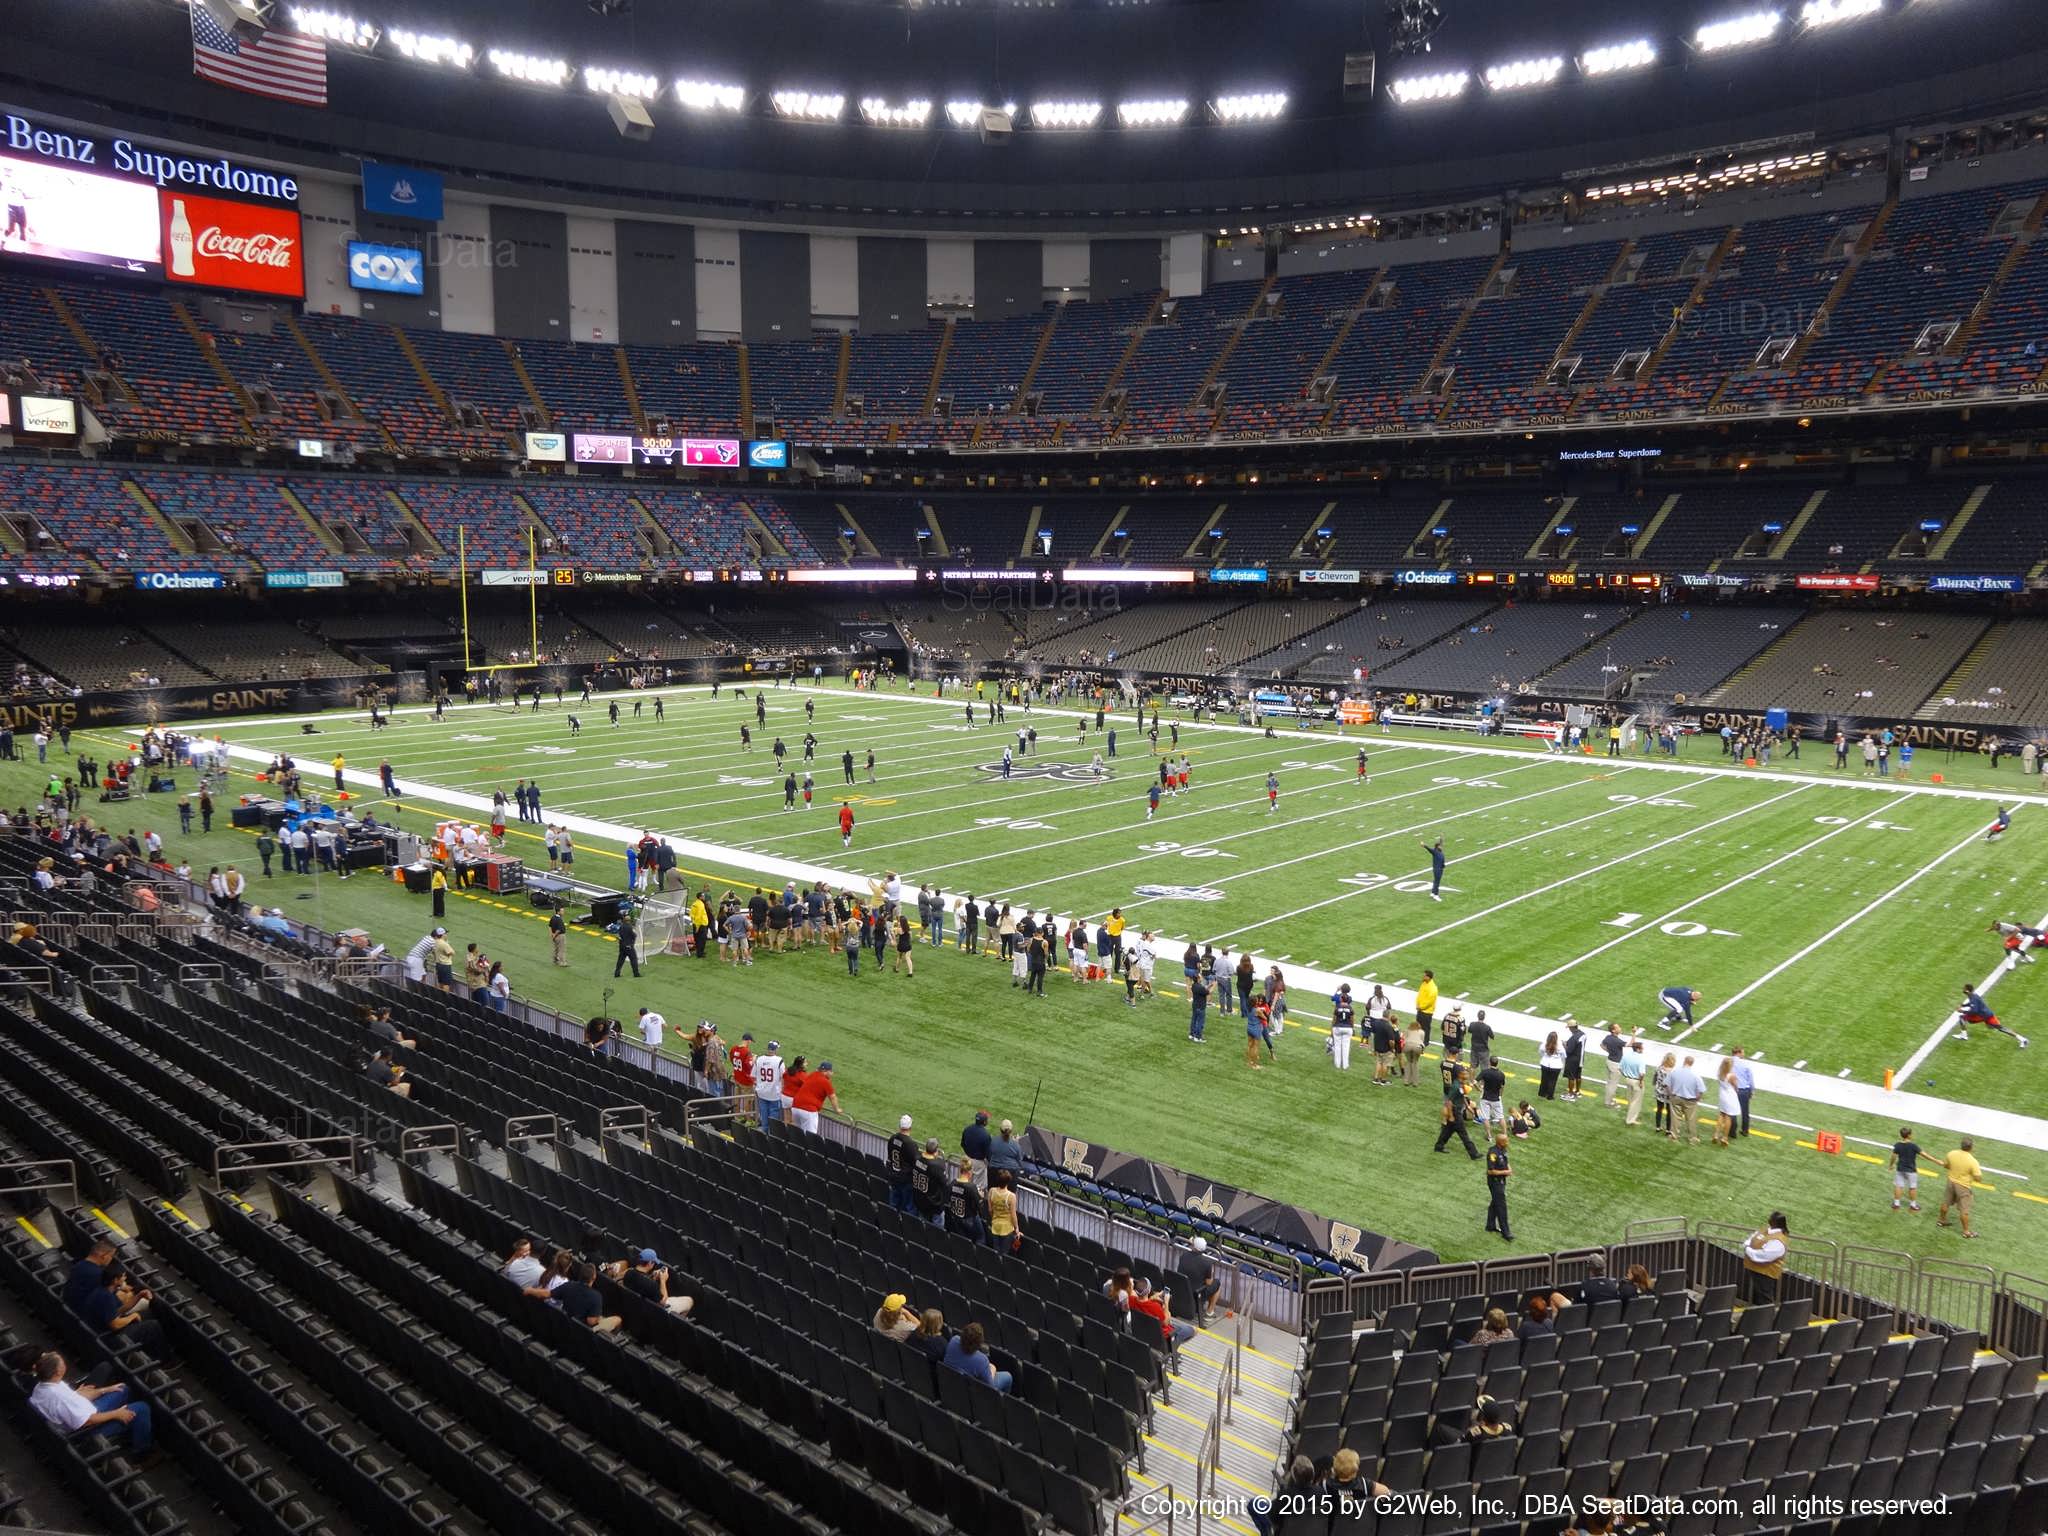 Seat view from section 212 at the Mercedes-Benz Superdome, home of the New Orleans Saints